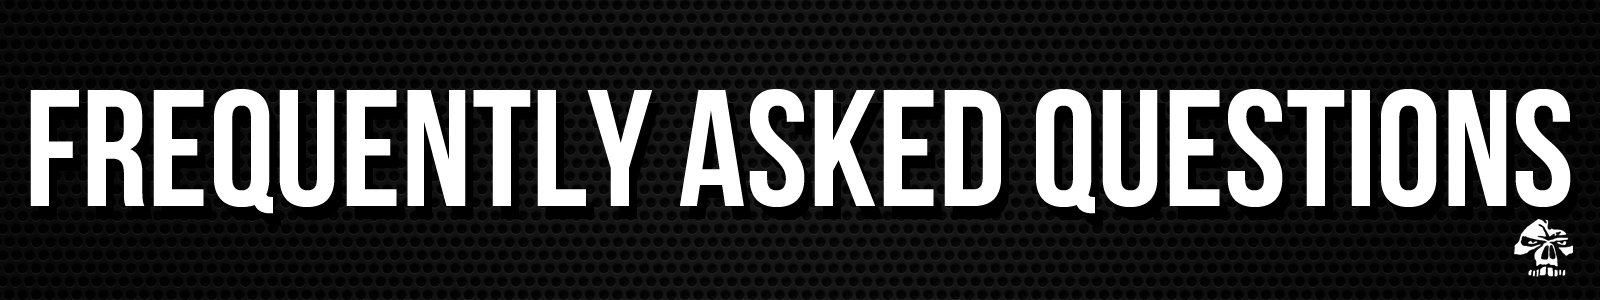 frequently asked questions header